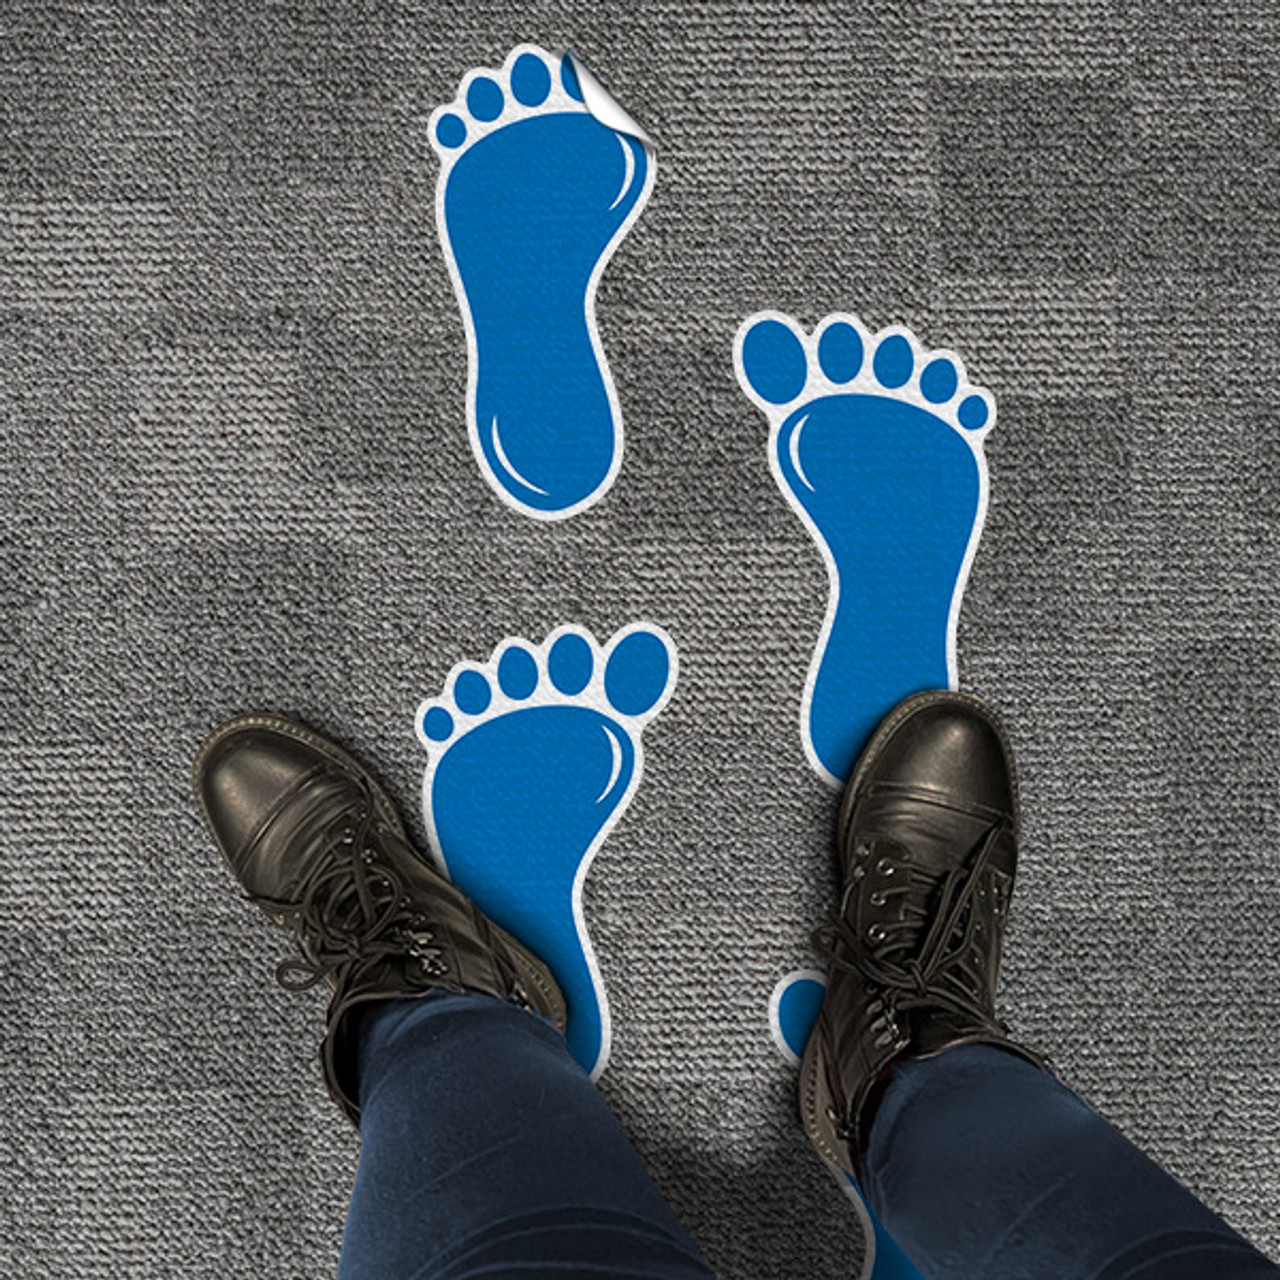 Self adhesive Floor Feet with non slip finish for carpet